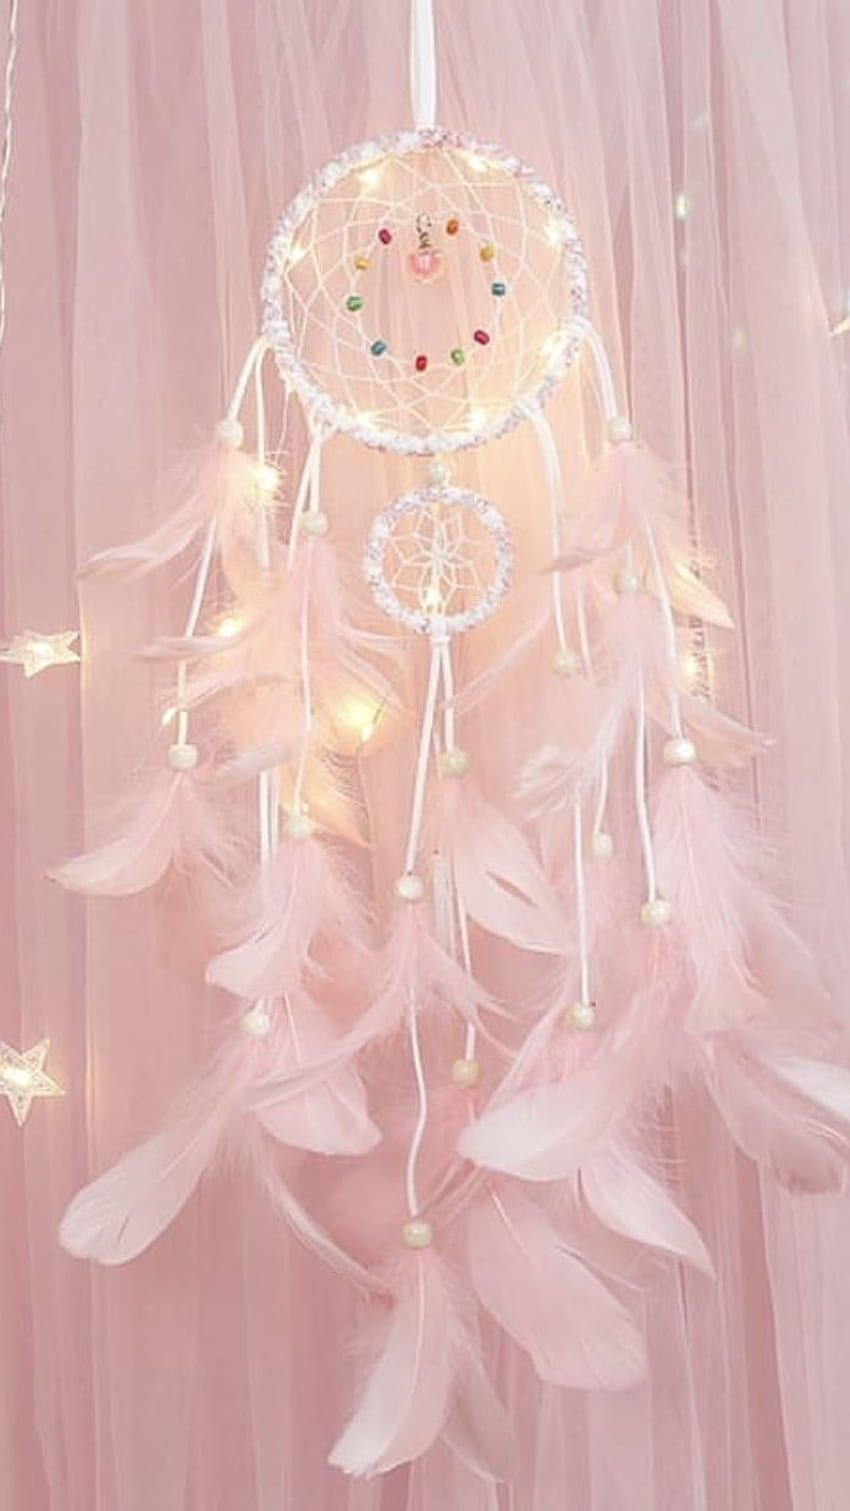 A pink dream catcher with white LED lights and feathers. - Blush